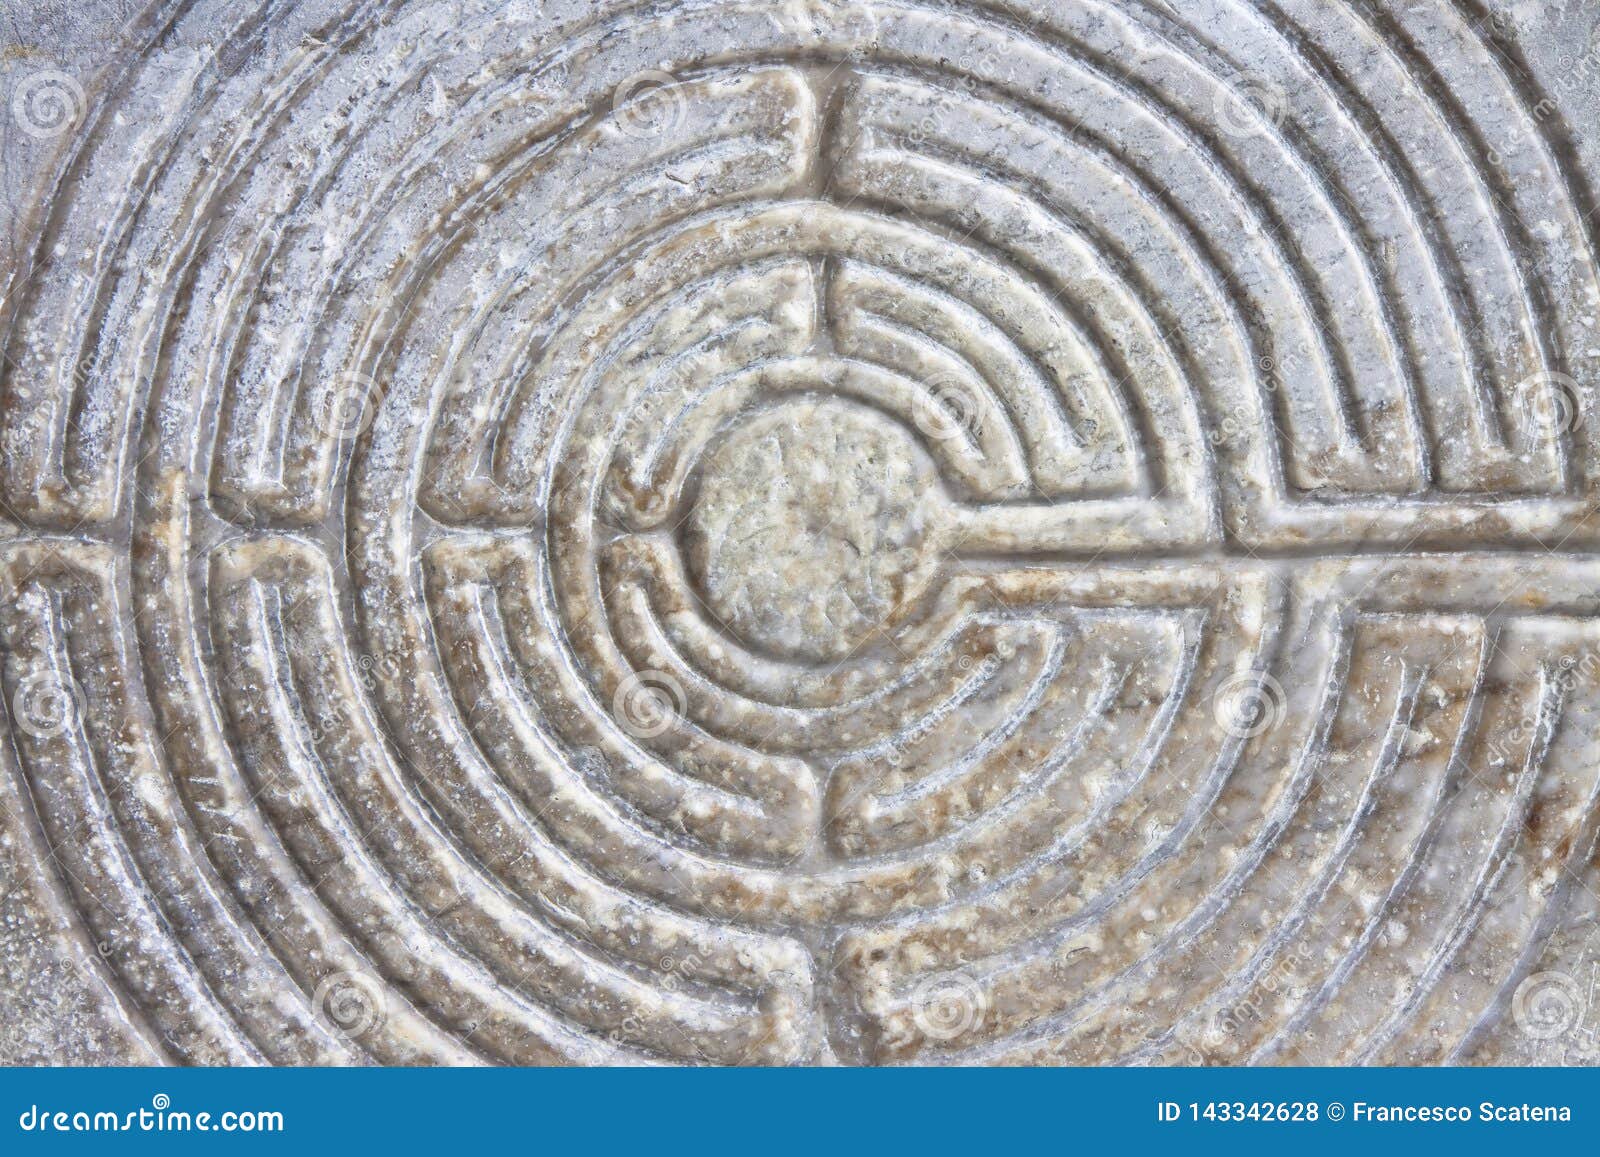 labyrinth carved on the stone facade of a romanesque church of the 11th century tuscany - italy